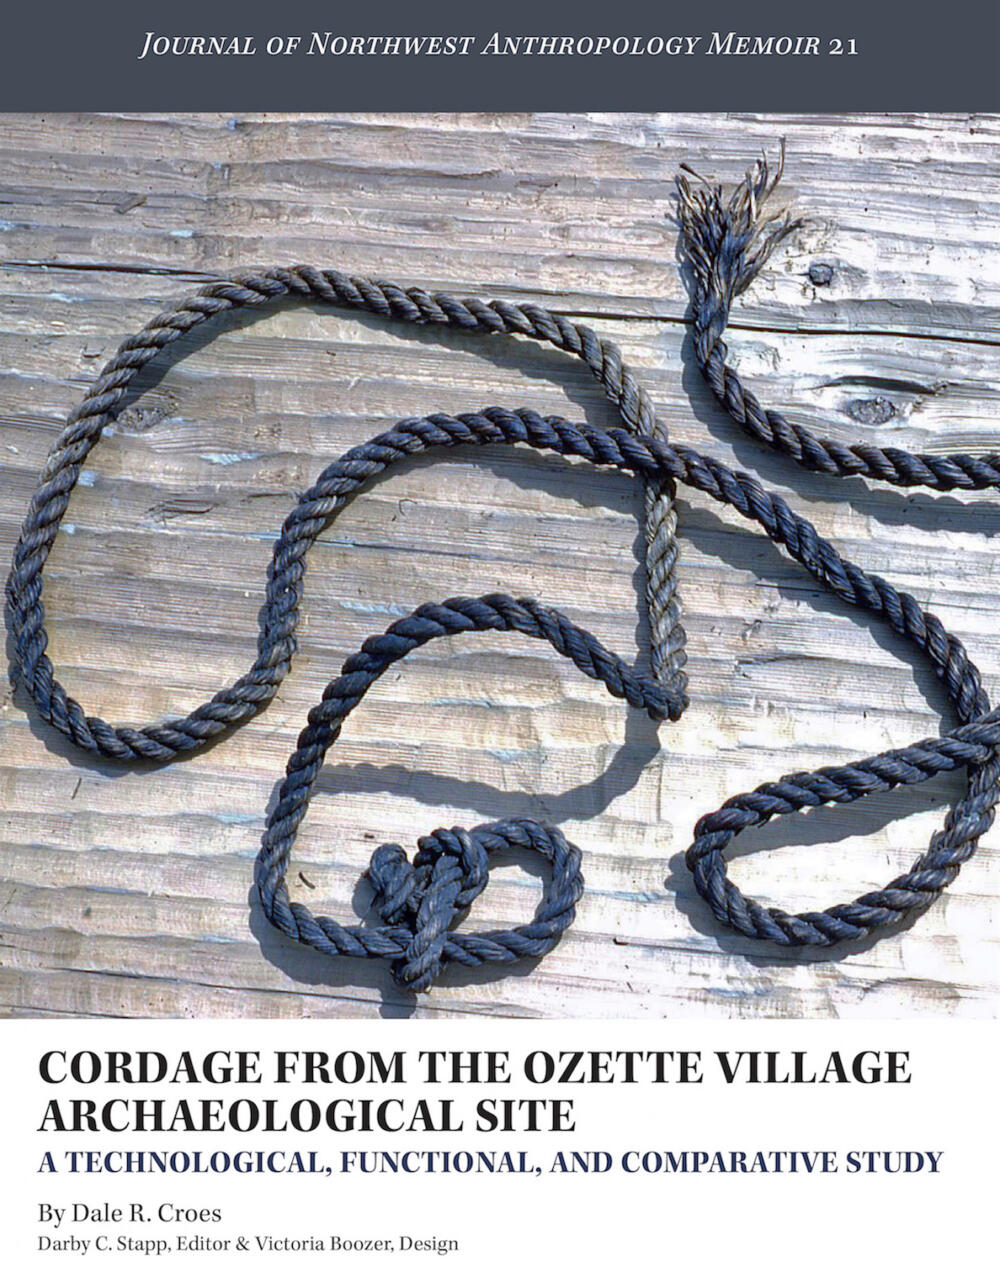 Floating Rope and Cork Line from the Cordage Experts at Novabraid